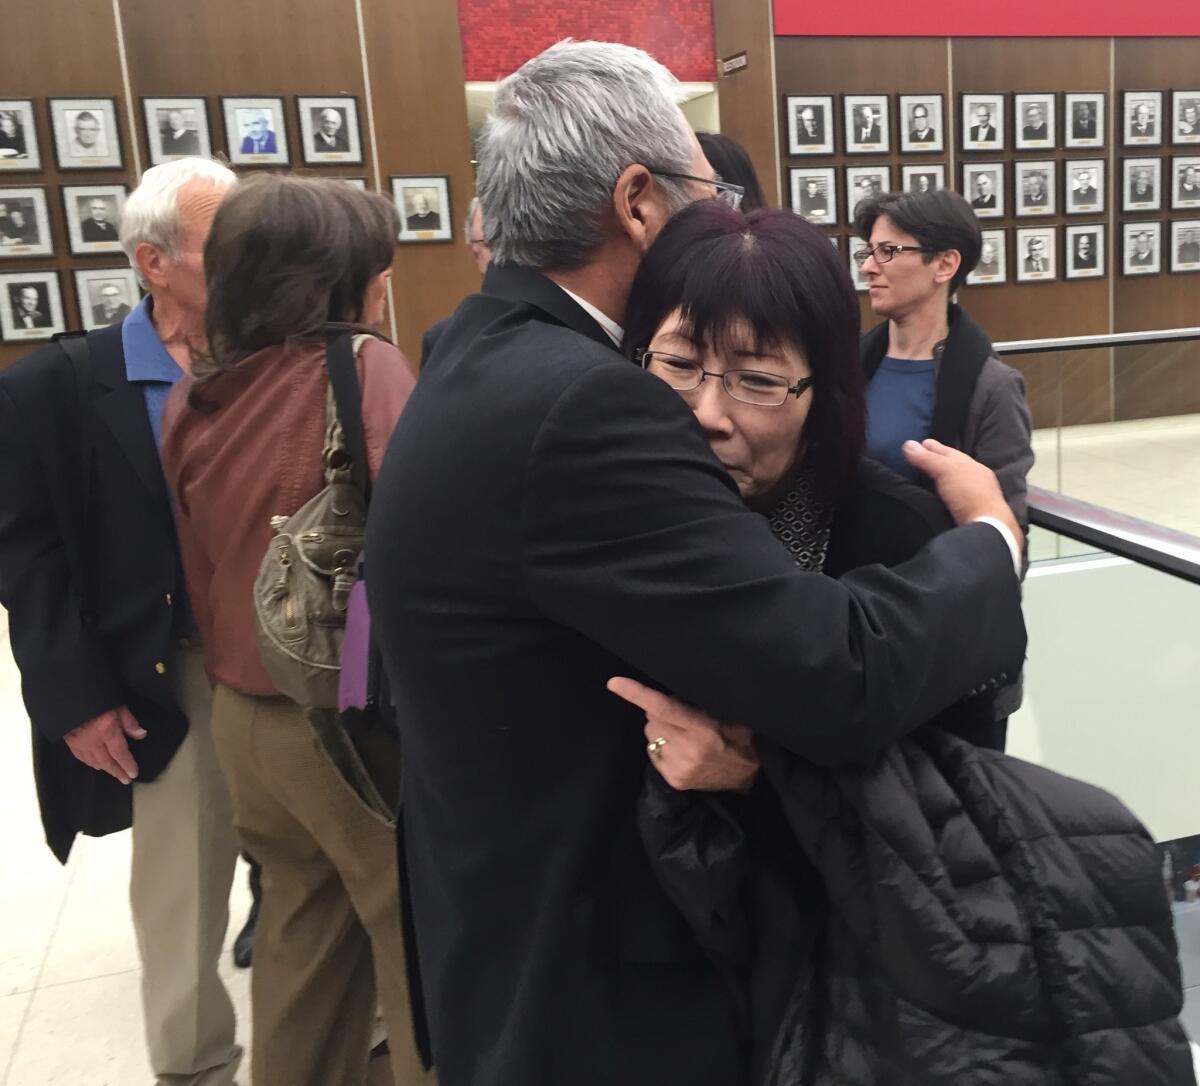 Masa and June Kibuishi embrace outside an Orange County courtroom Monday after a jury recommended the death penalty for the man convicted of murdering their 23-year-old daughter, Juri “Julie” Kibuishi, in May 2010.